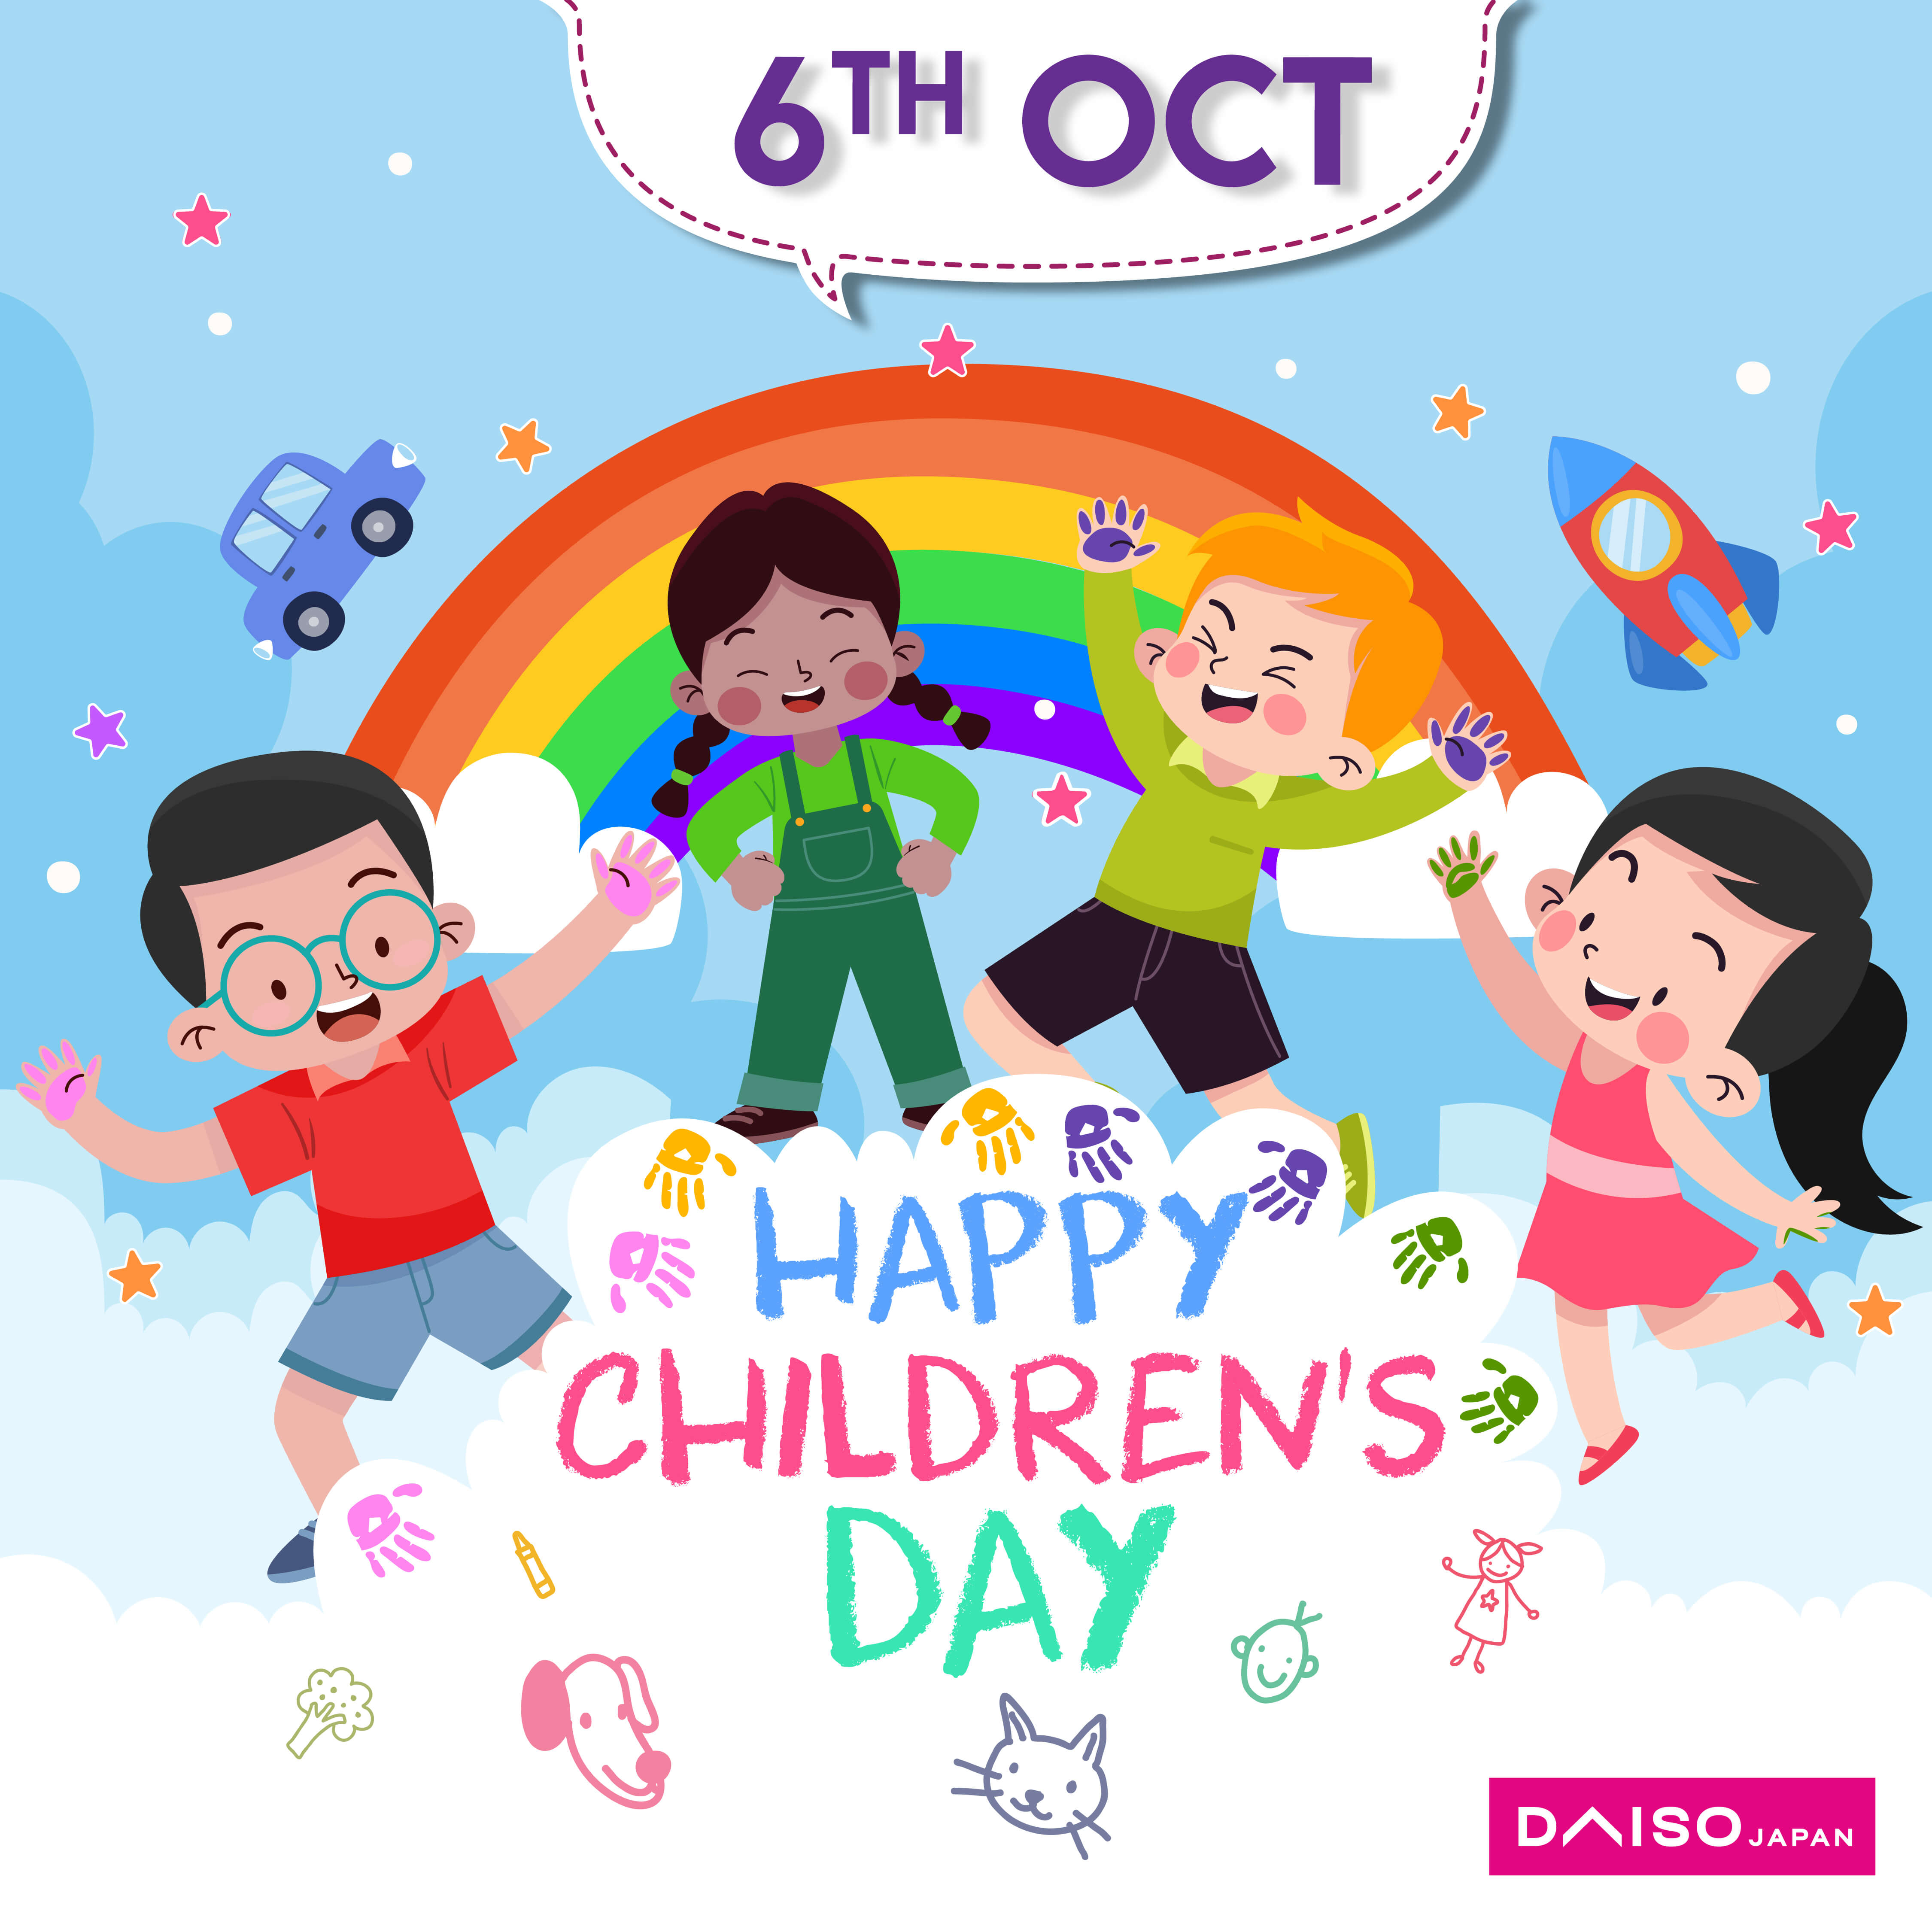 Gift a surprise for Children’s Day!